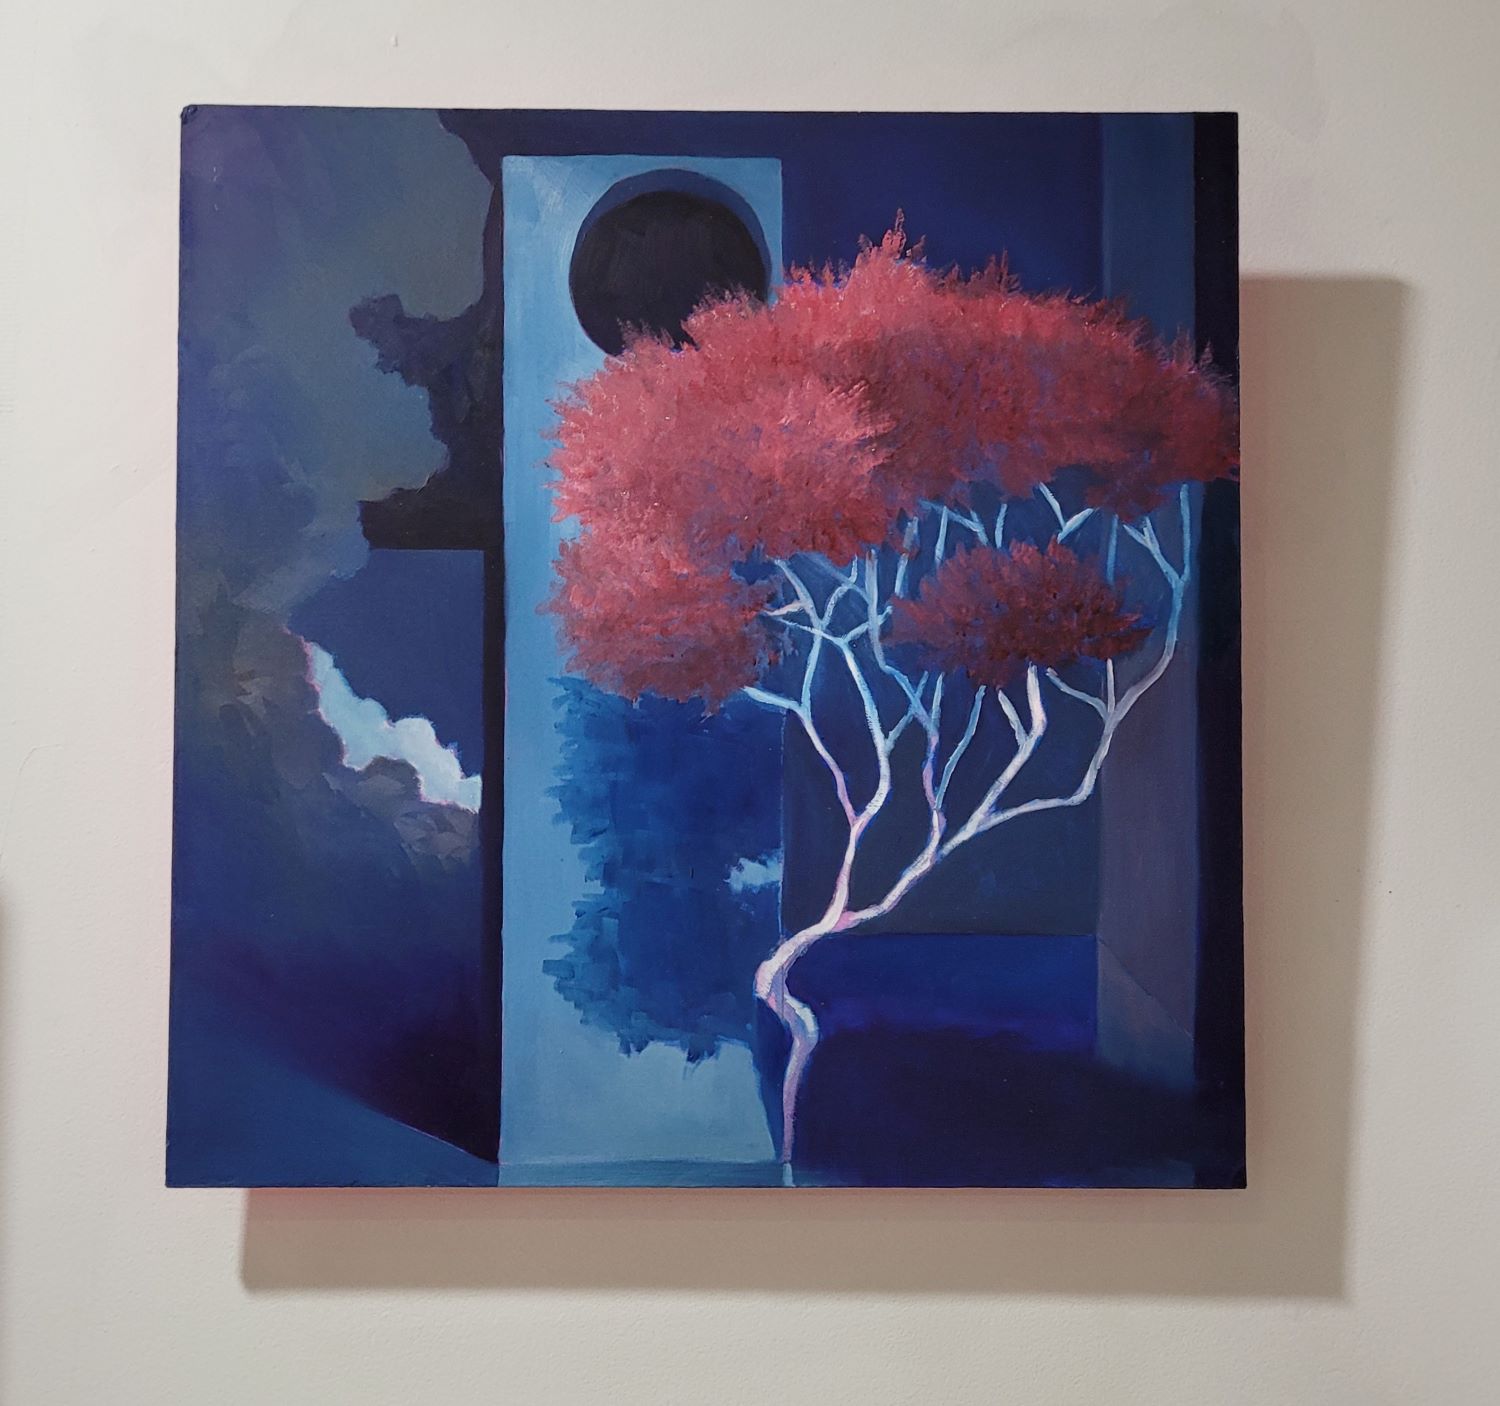 Small painting of a surreal, blue interior space with a large red tree and clouds in the middle of it. 